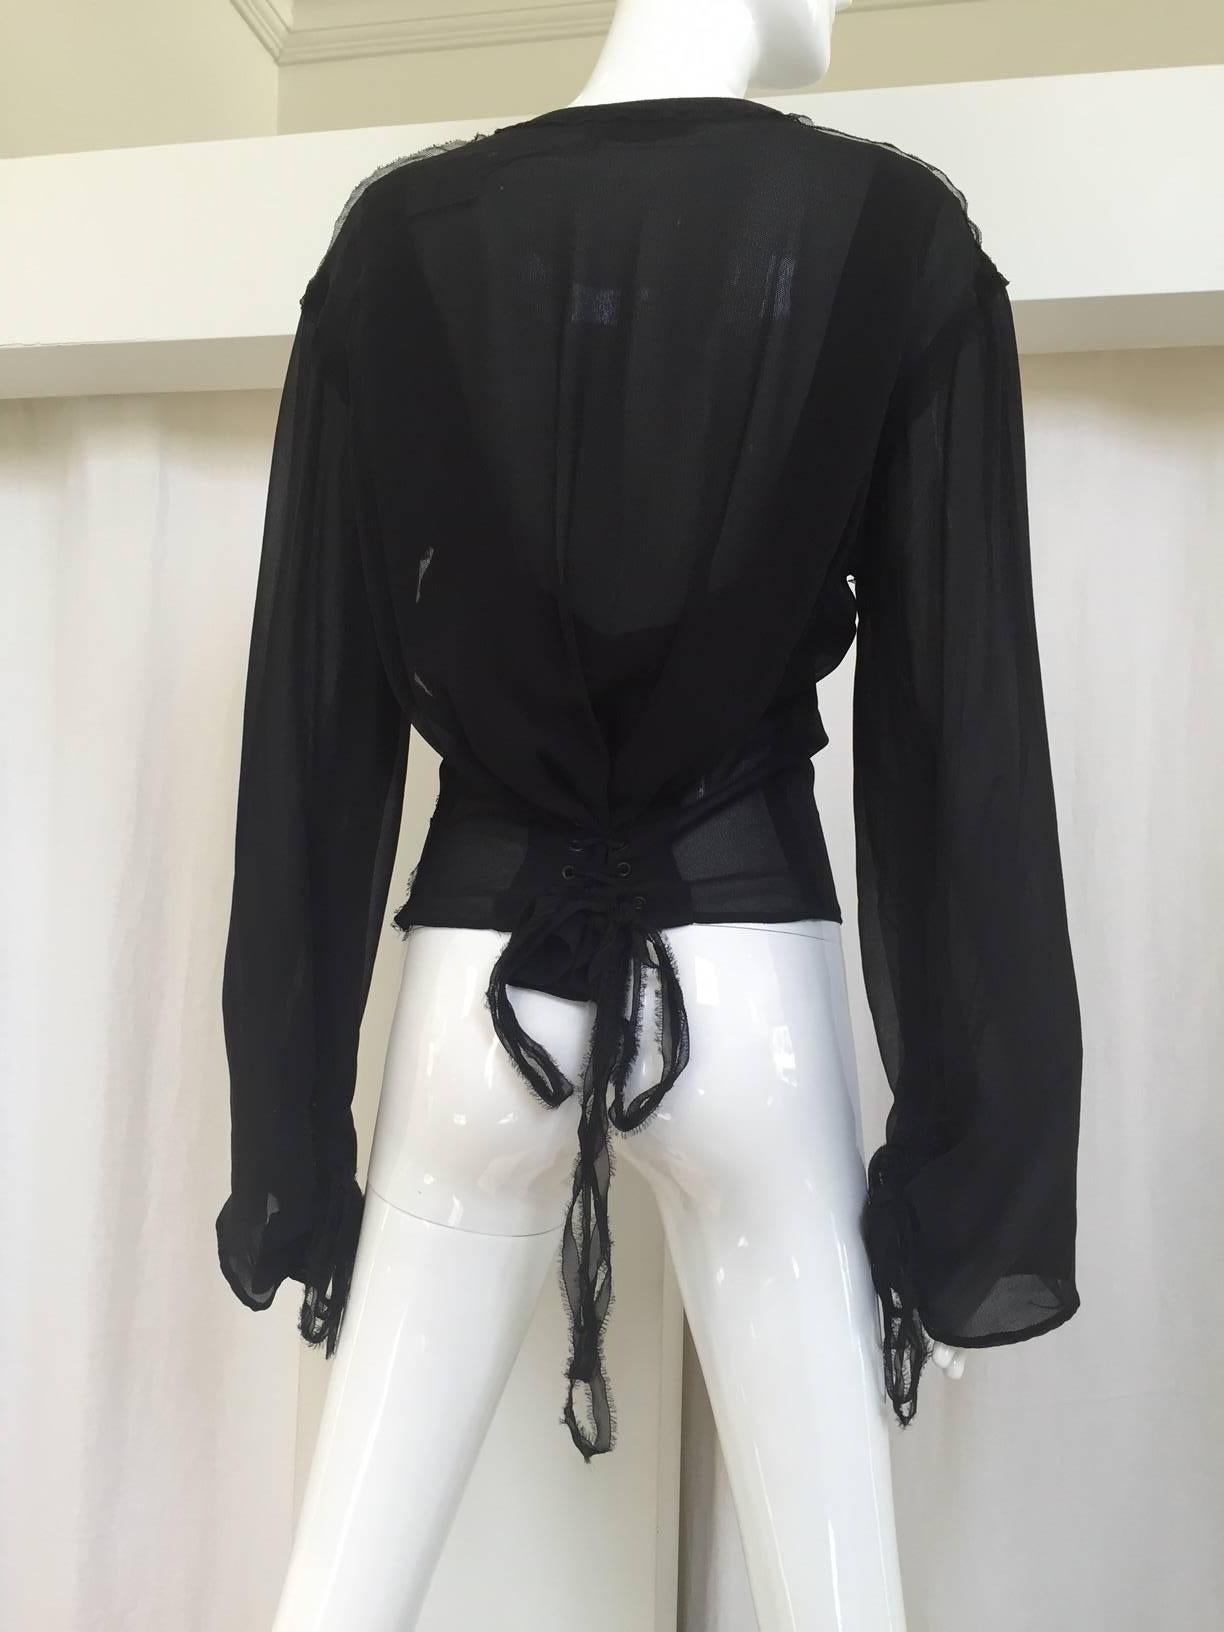 Early 2000s YSL black silk lace up blouse by Tom Ford. Marked size: 42
blouse is adjustable due to lacing in the front and back. Medium size
Measurement: 34-36